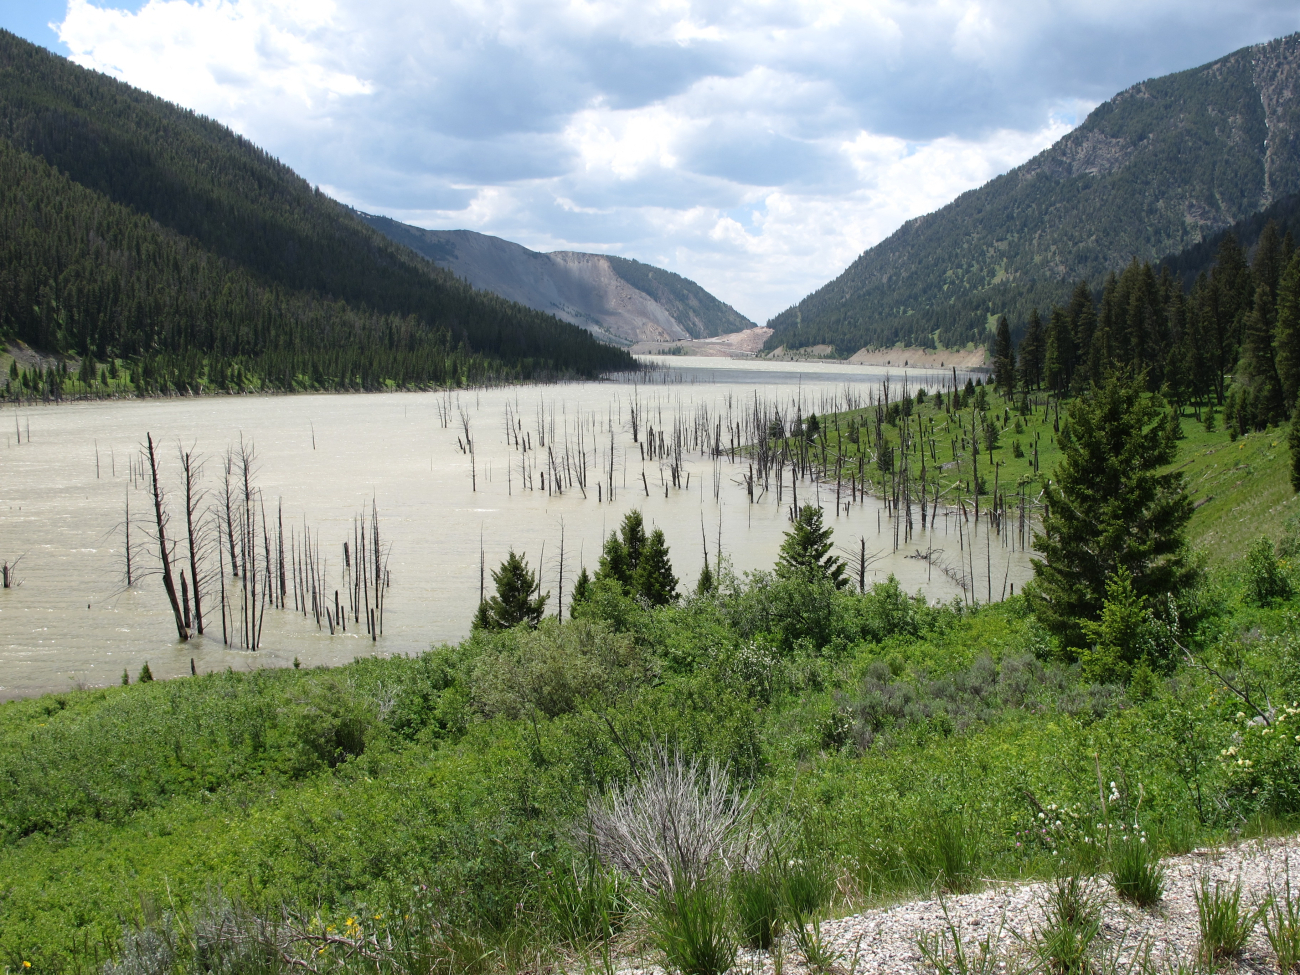 Quake Lake, formed on August 17, 1959, from a great landslide damming theMadison River following a 7